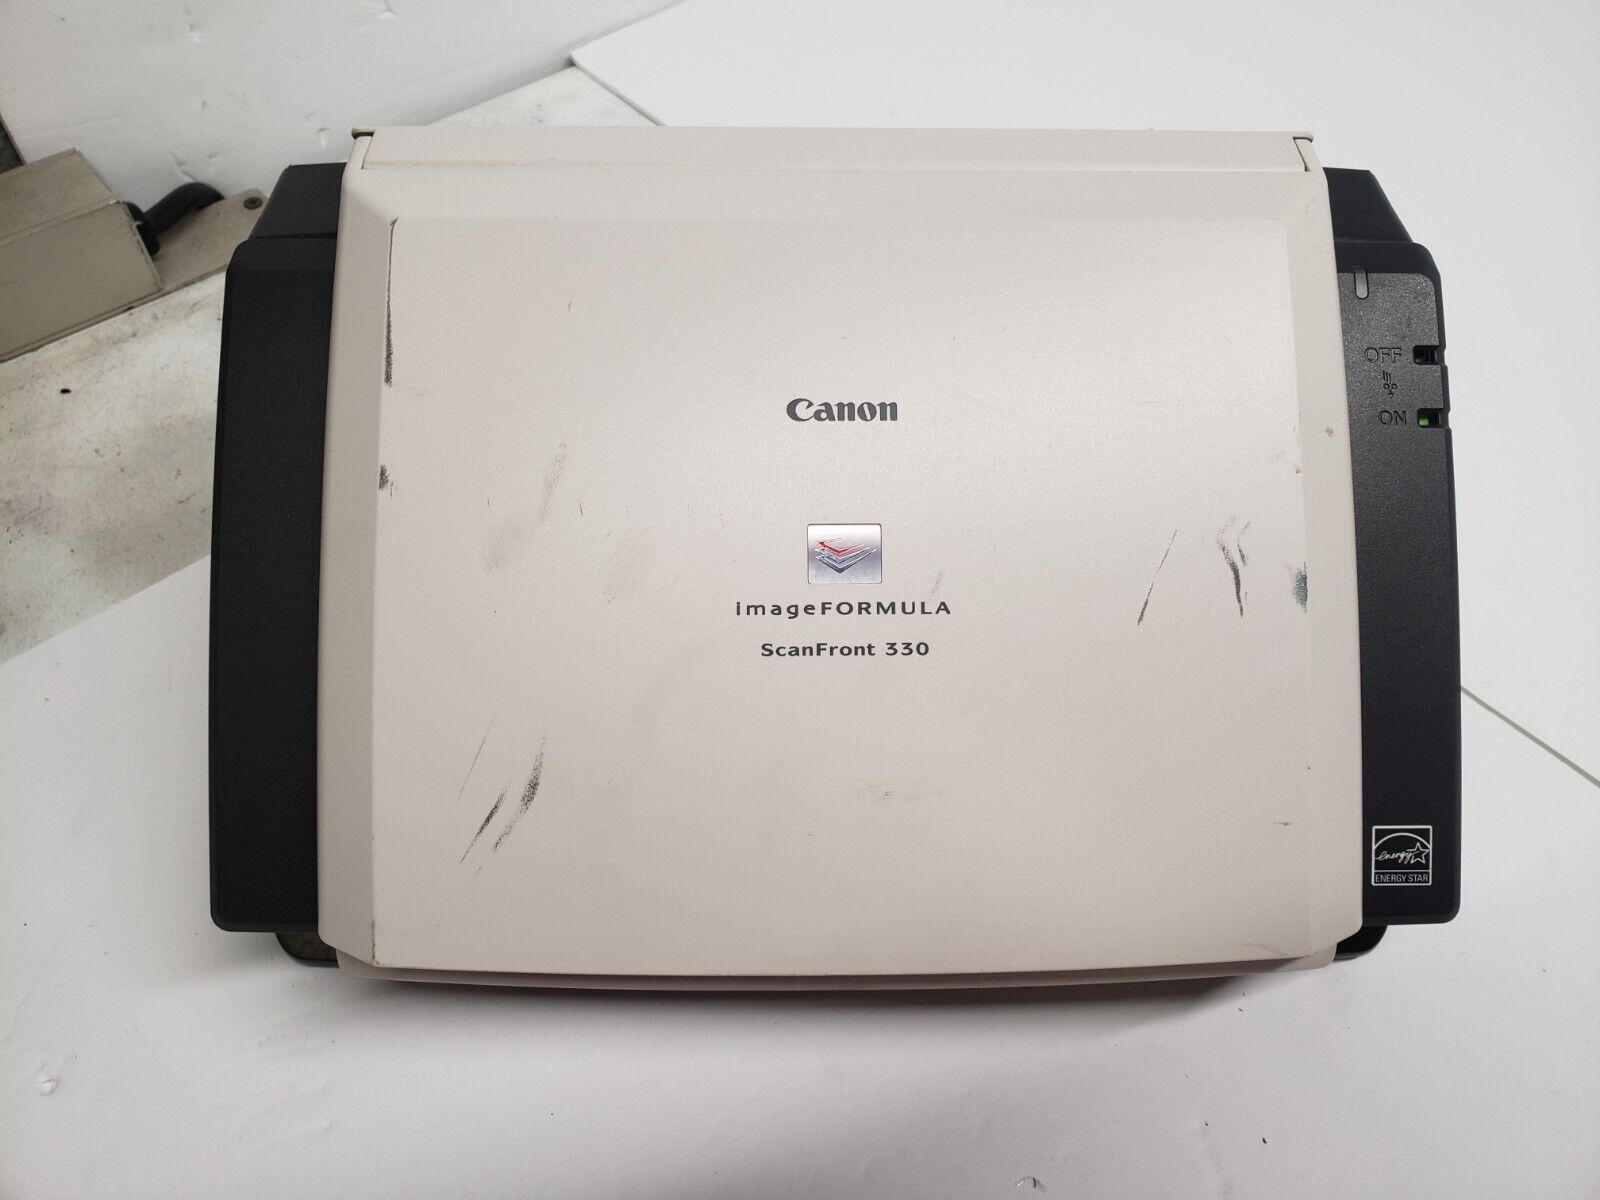 Canon imageFORMULA ScanFront 330 Document Scanner M111053 USB 2.0 / AS IS